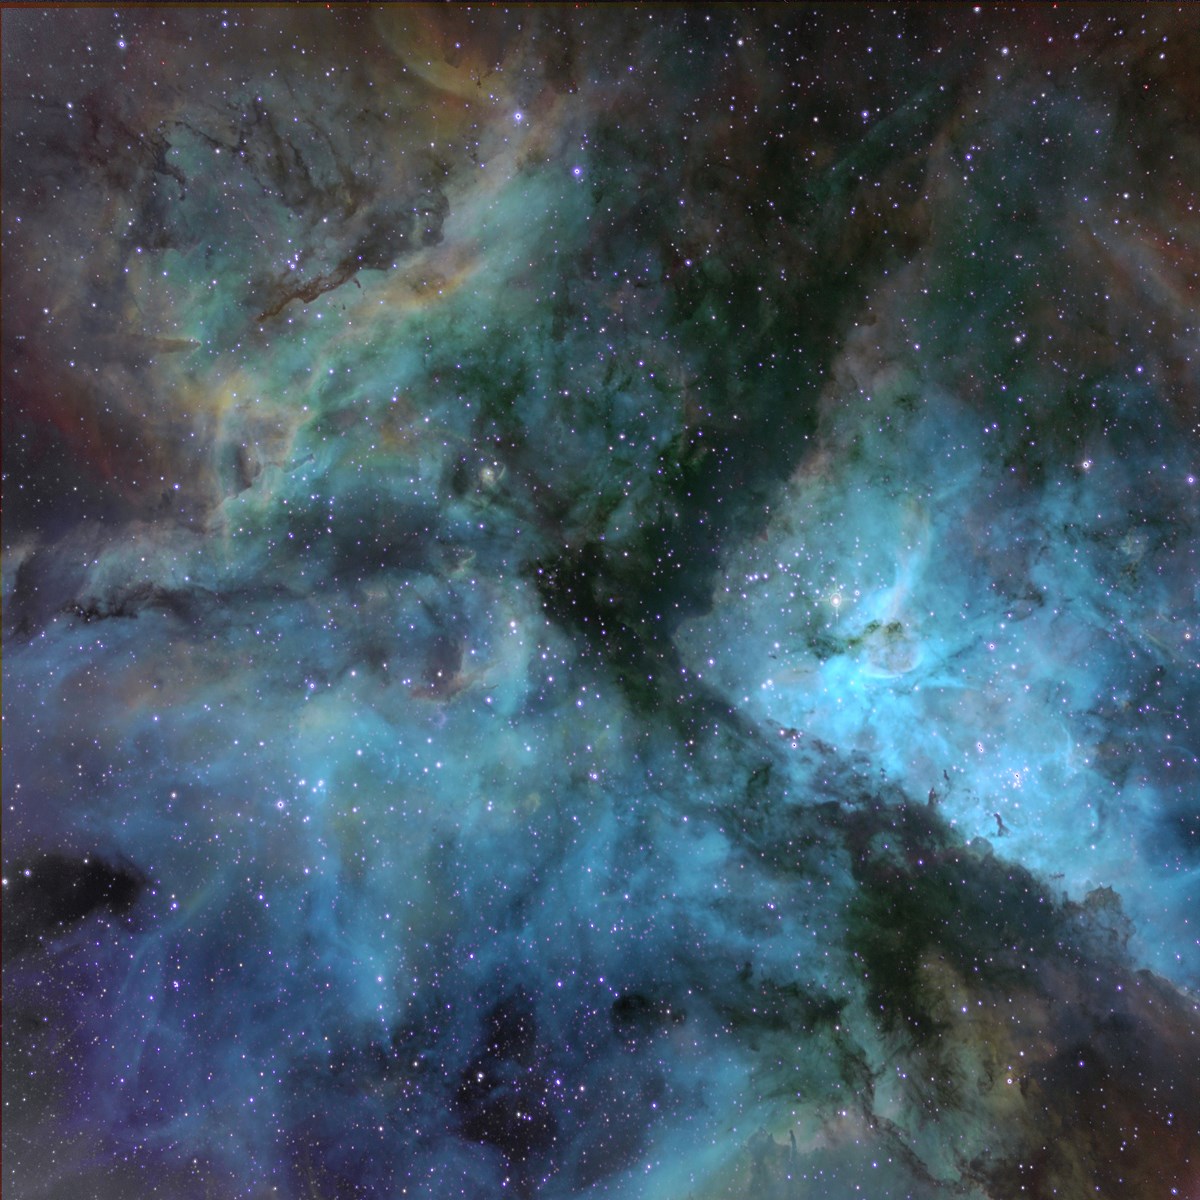 Spanning 300 light years, the Grand Nebula in the constellation Carina is much larger than the Orion Nebula, but less well known because it’s in the southern sky. (The colors here have been reassigned to accentuate the different elements in the cloud.)